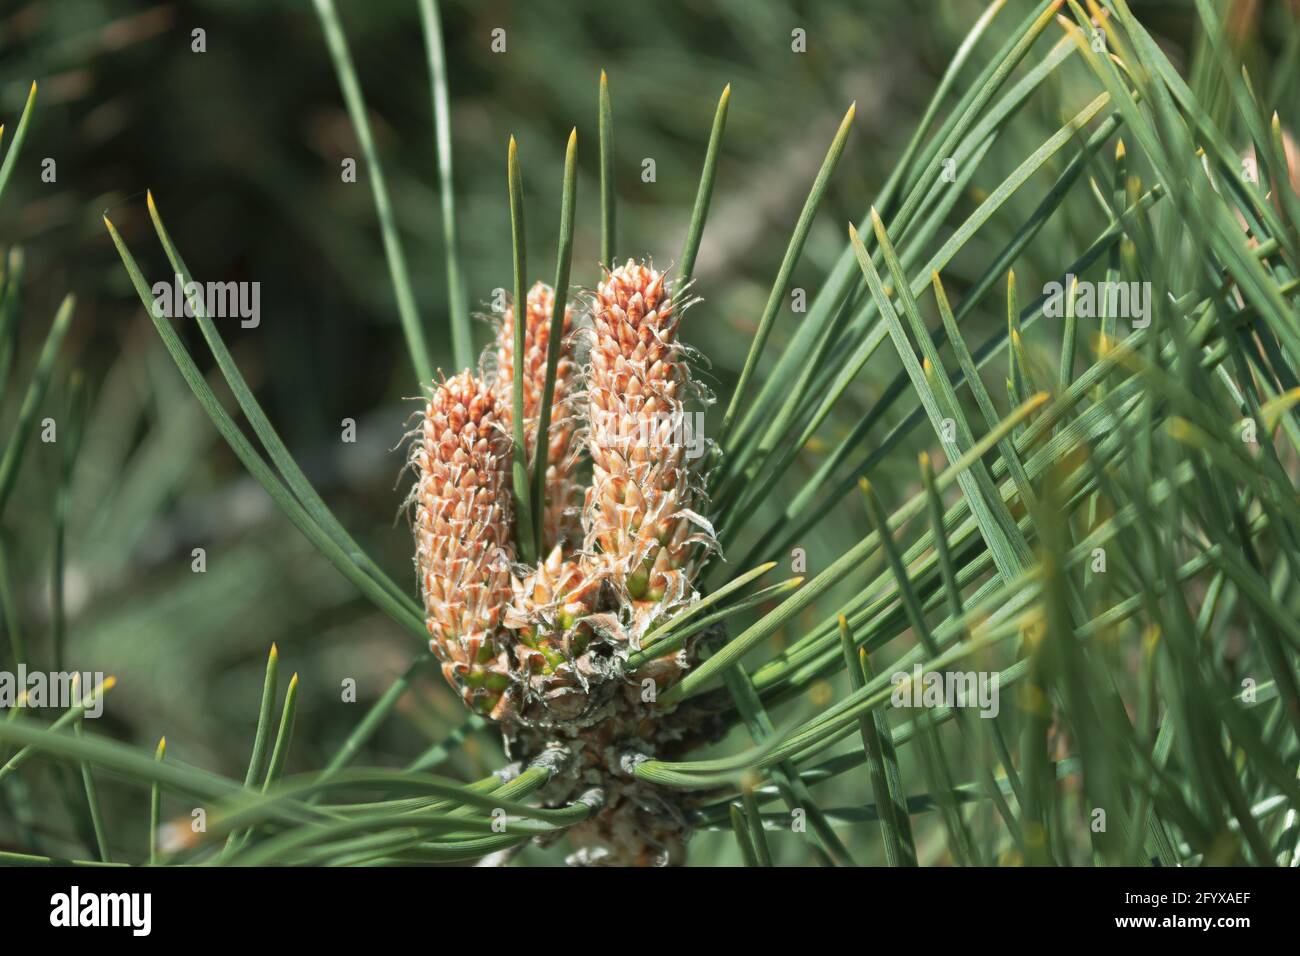 Young inflorescence on a pine branch in the spring. Inflorescence of a fluffy sprout and cones on pine branches. Flowering mediterranean pine Stock Photo